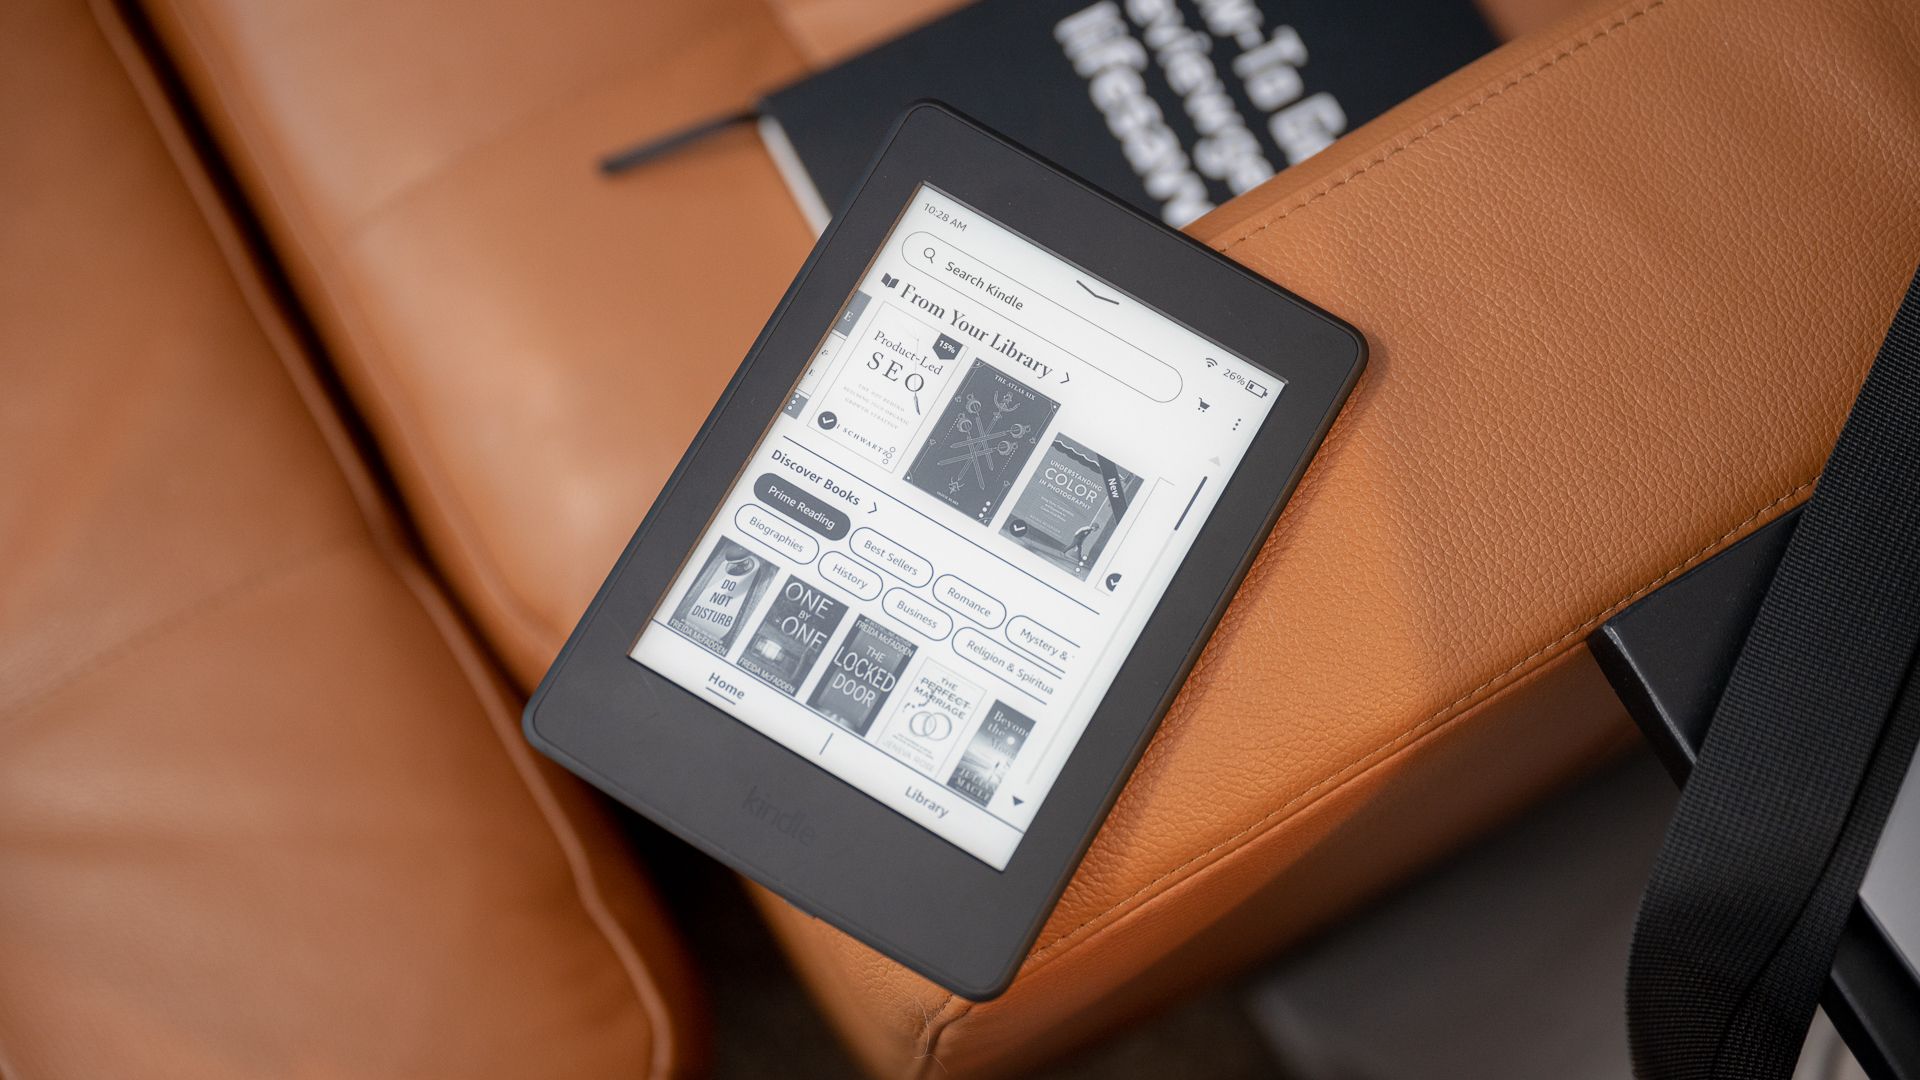 2015 Amazon Kindle Paperwhite eReader sitting on a couch showing the home screen